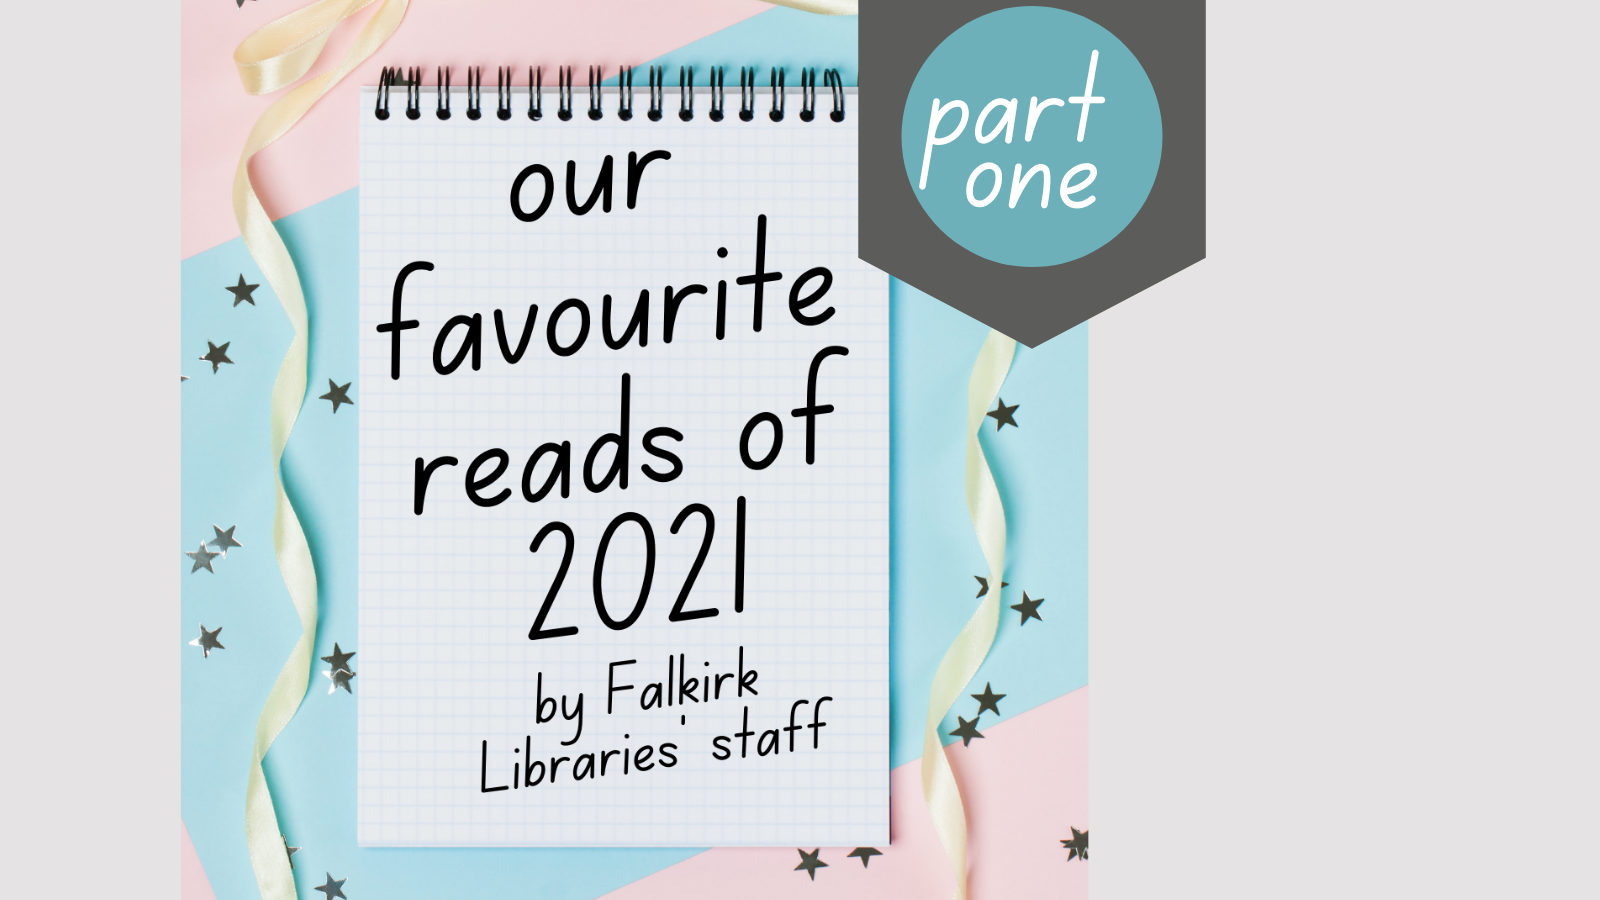 Our favourite reads of 2021 by Falkirk Libraries staff